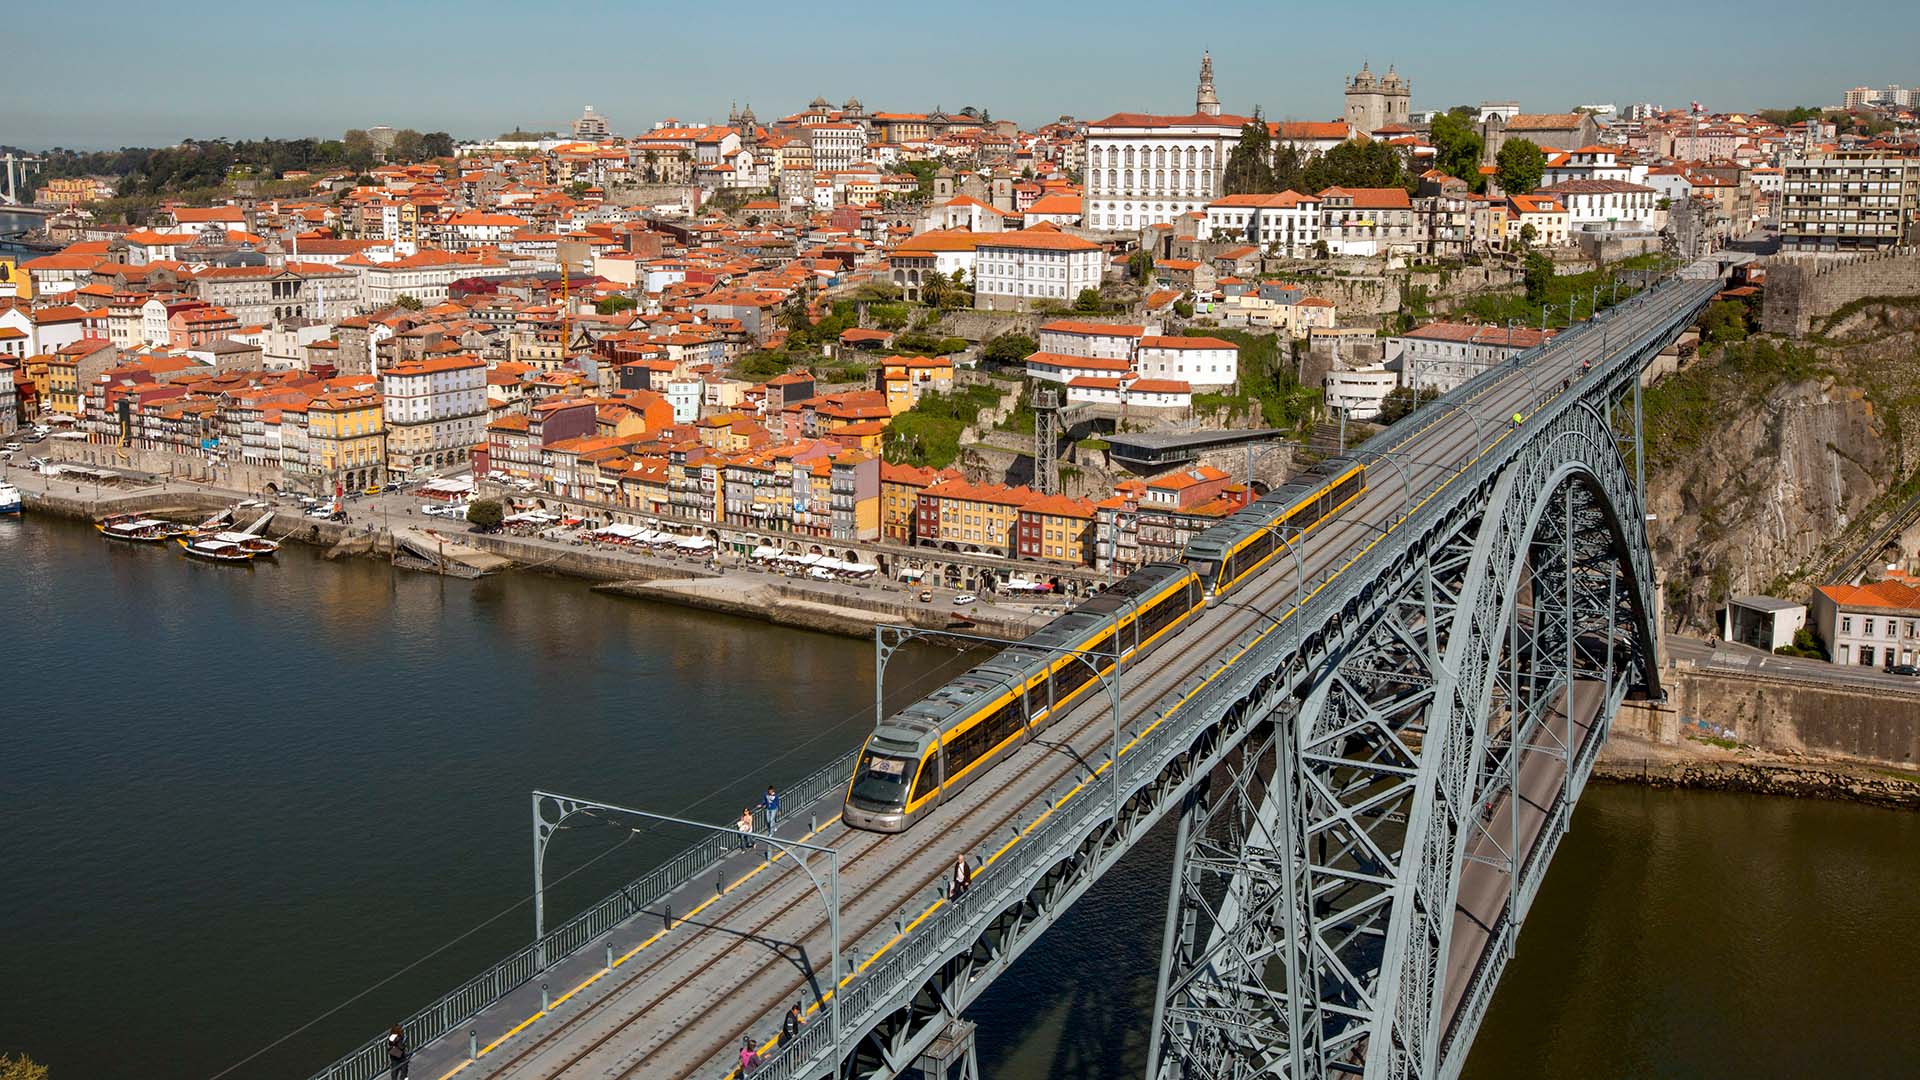 View of Portugal city